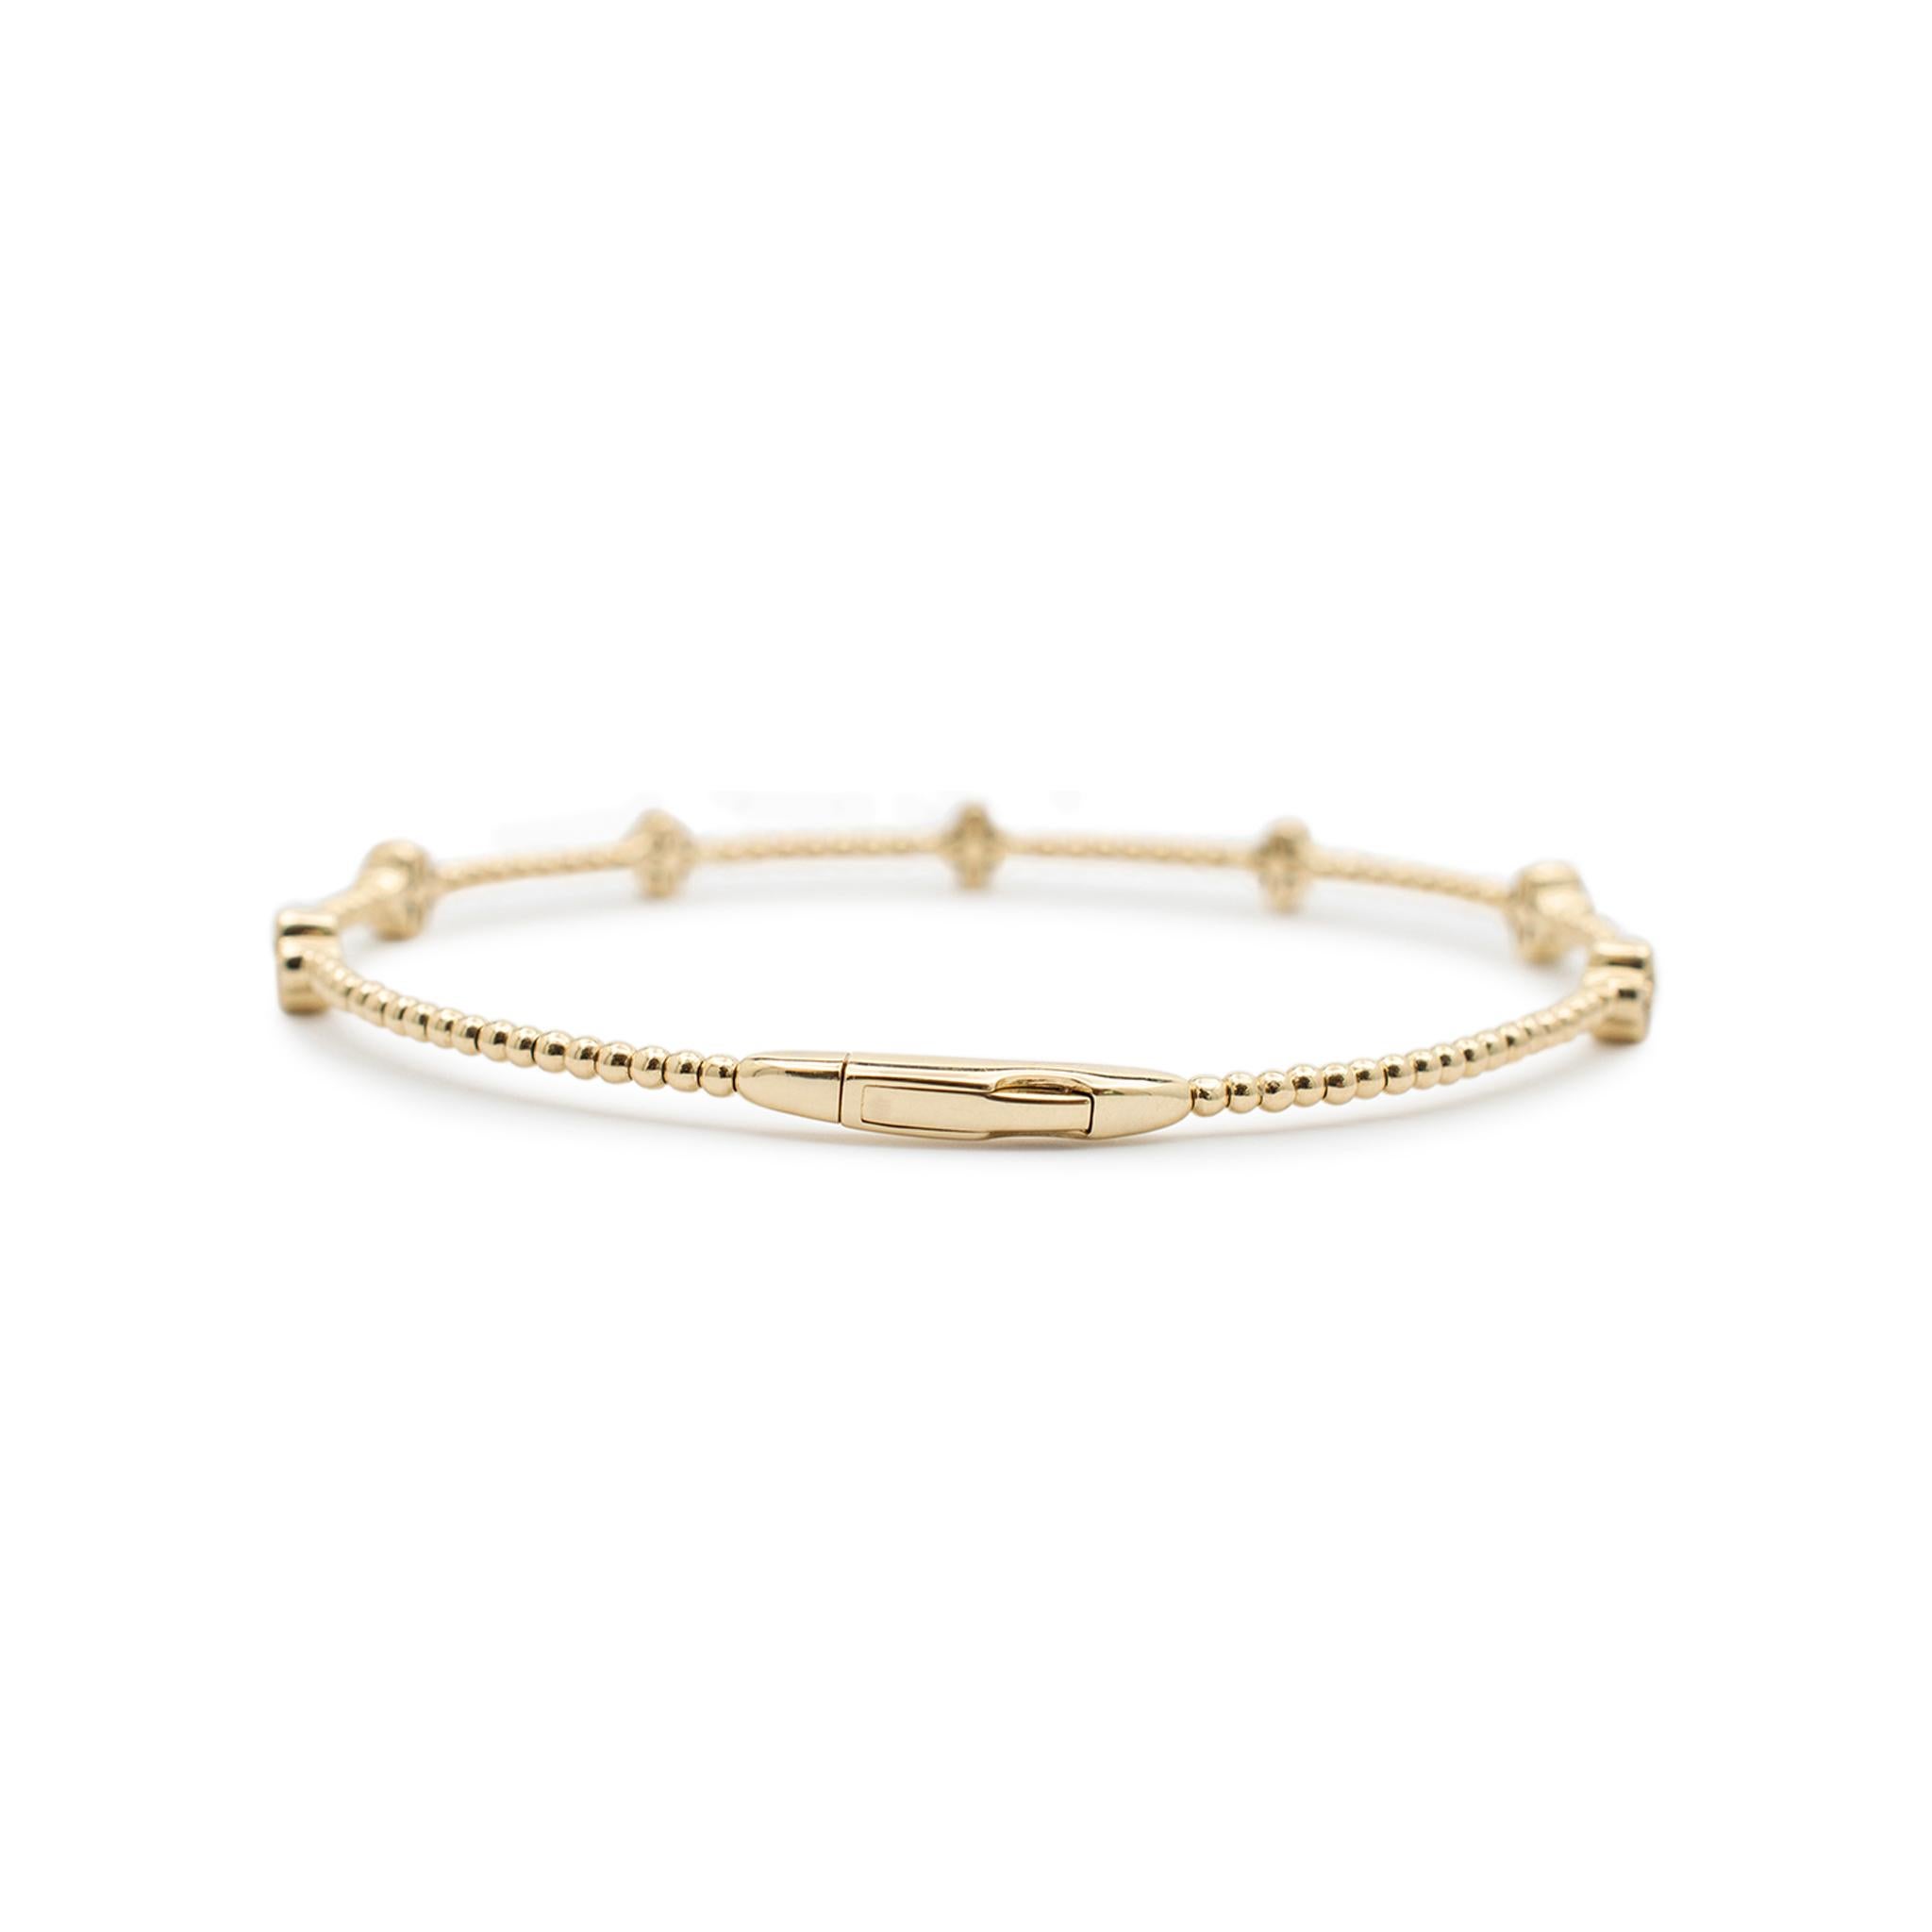 Gender: Ladies

Metal Type: 14K Yellow Gold

Length: 6.75 Inches

Width: 5.00 mm

Weight: 5.90 grams


Ladies 14K yellow gold diamond bangle bracelet. Engraved with 